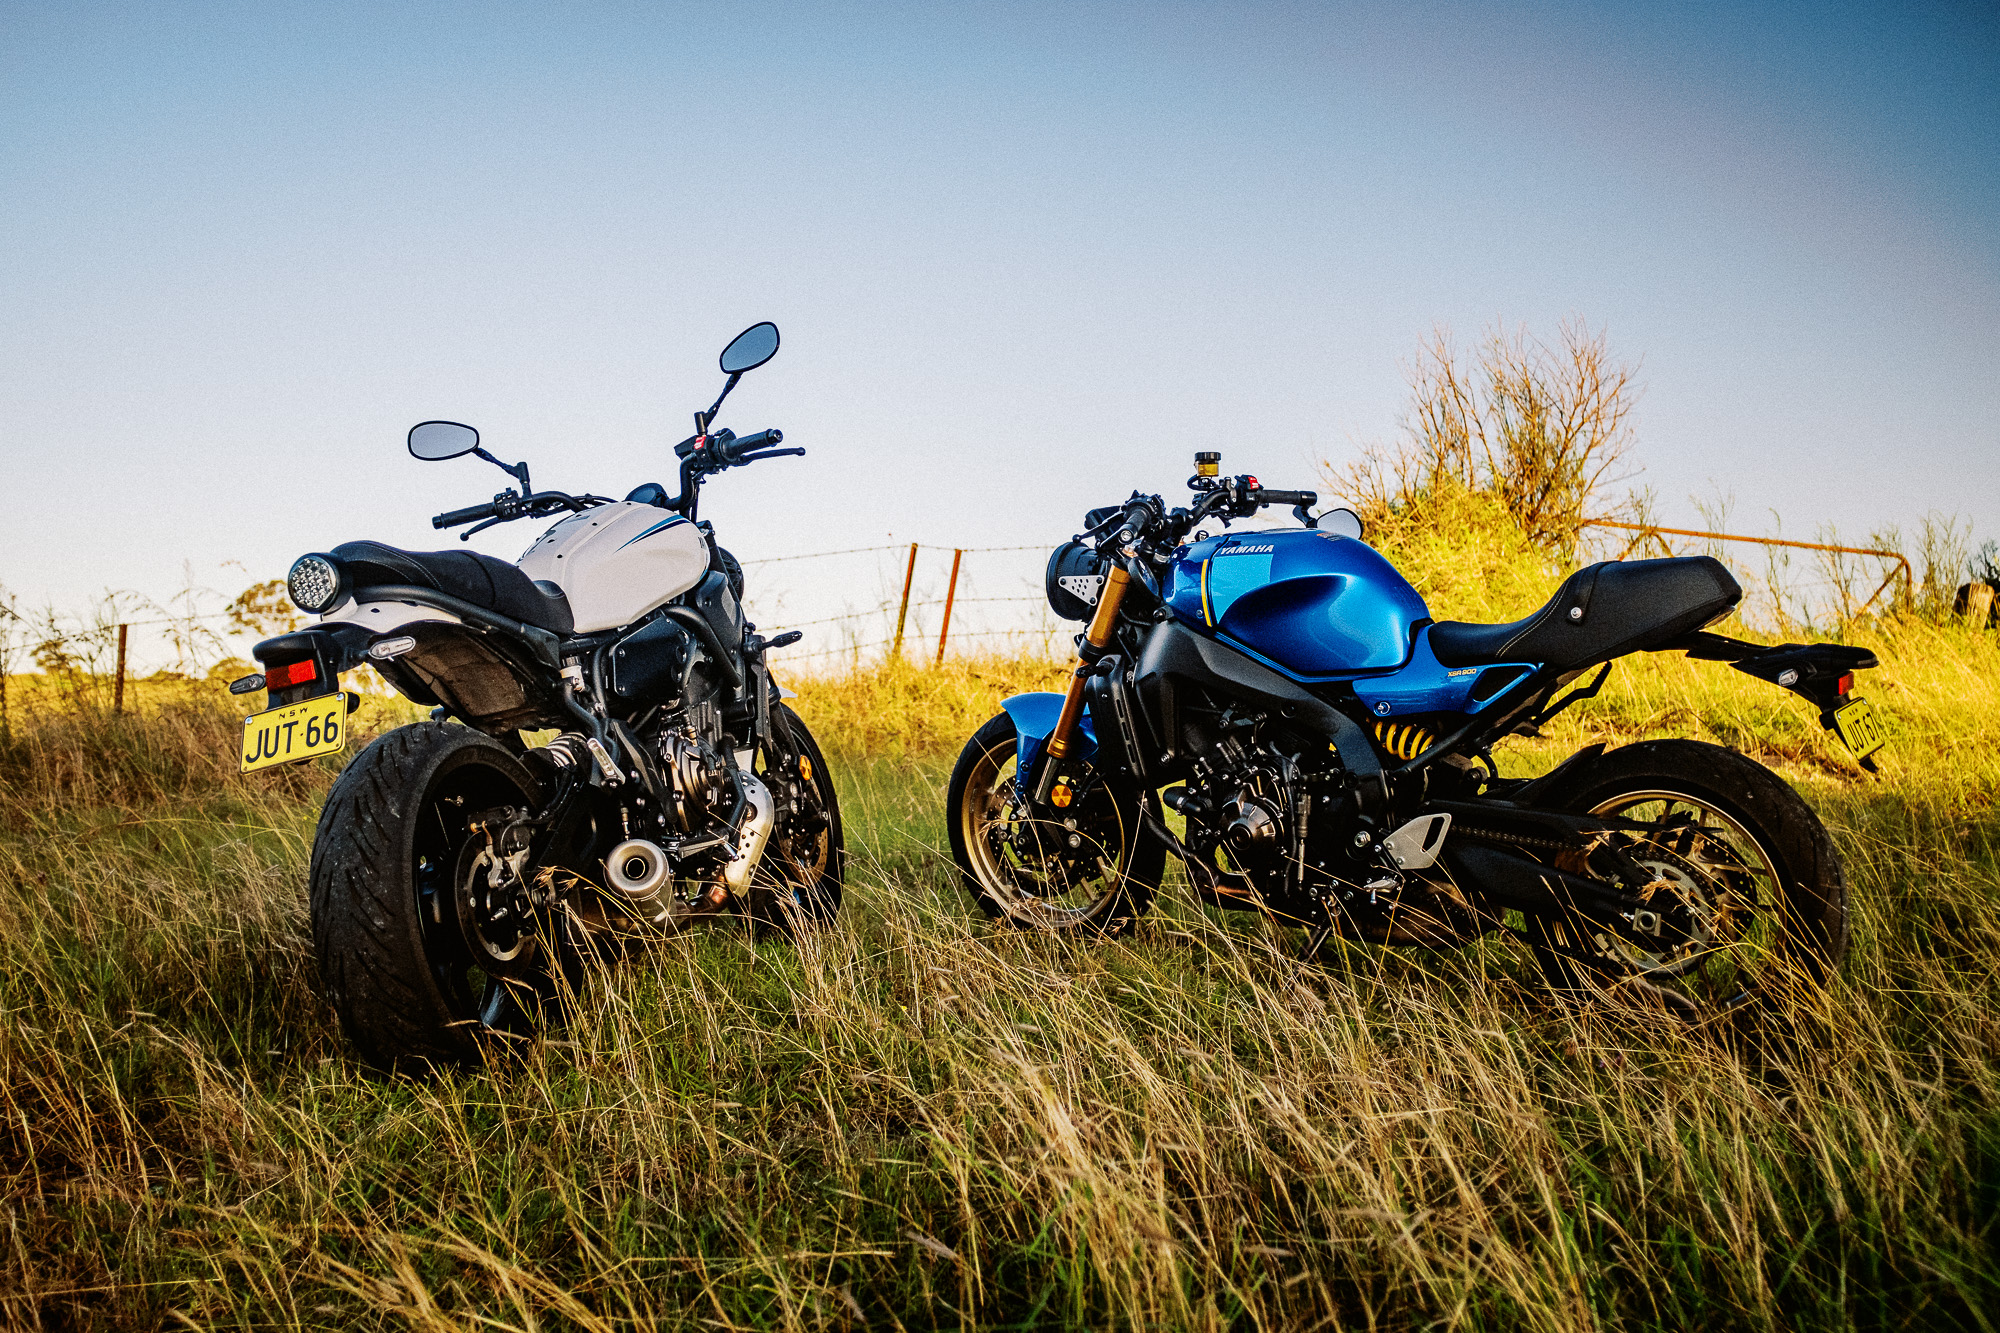 A 2020 Yamaha XSR700 motorcycle and a new XSR900 motorcycle stand on a hill at sunset in Sydney's outer rural suburbs